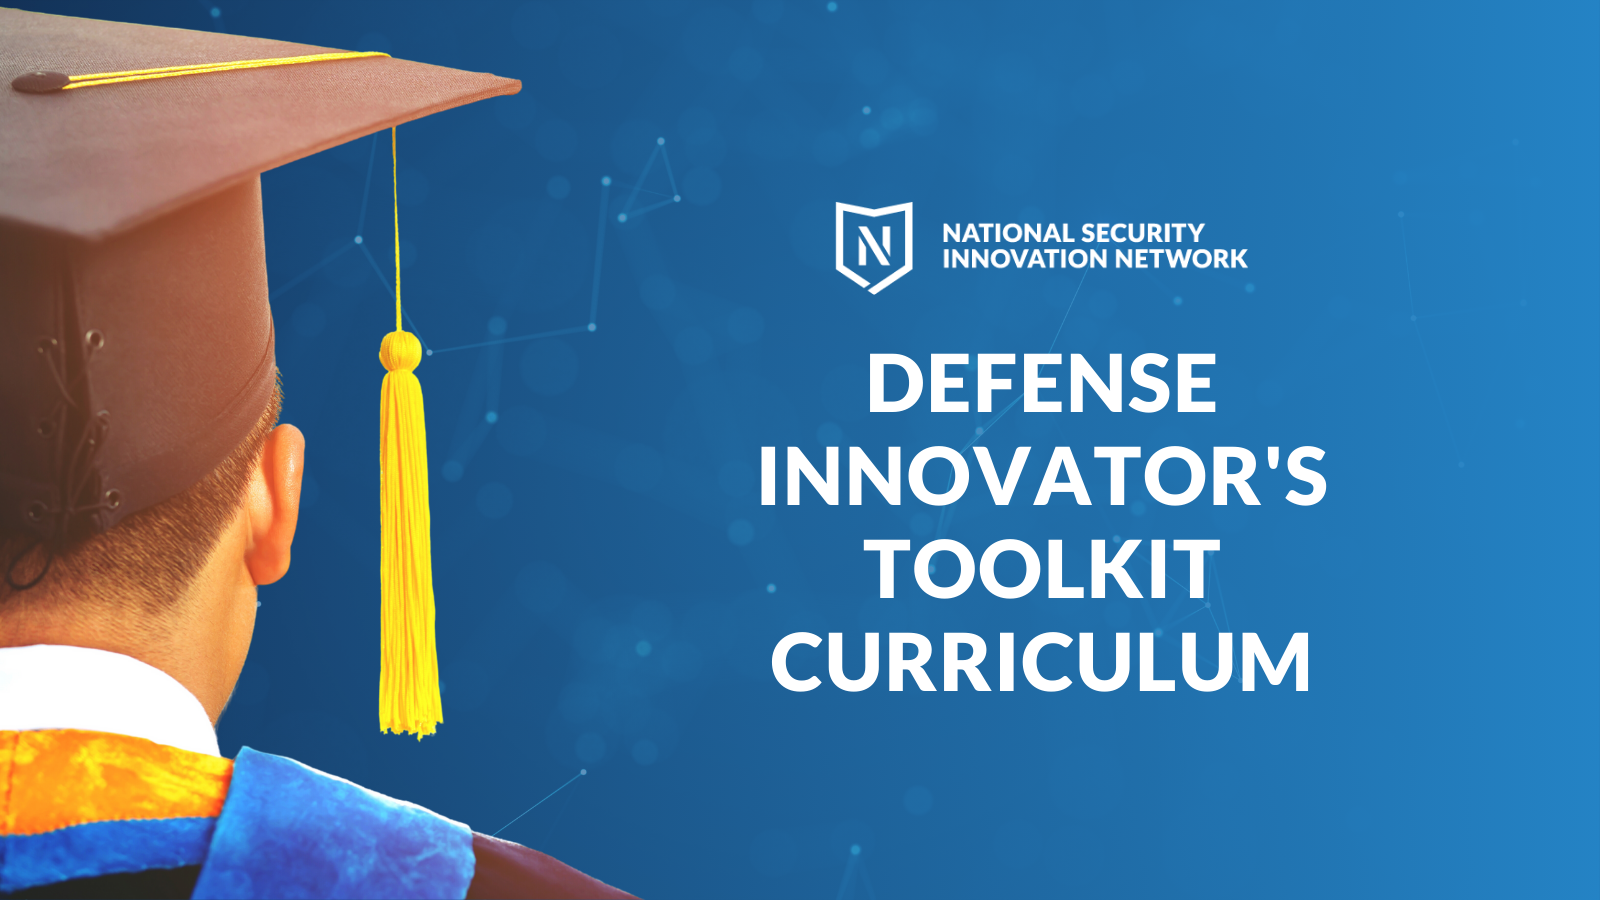 Request for Proposal - Defense Innovators Toolkit Curriculum